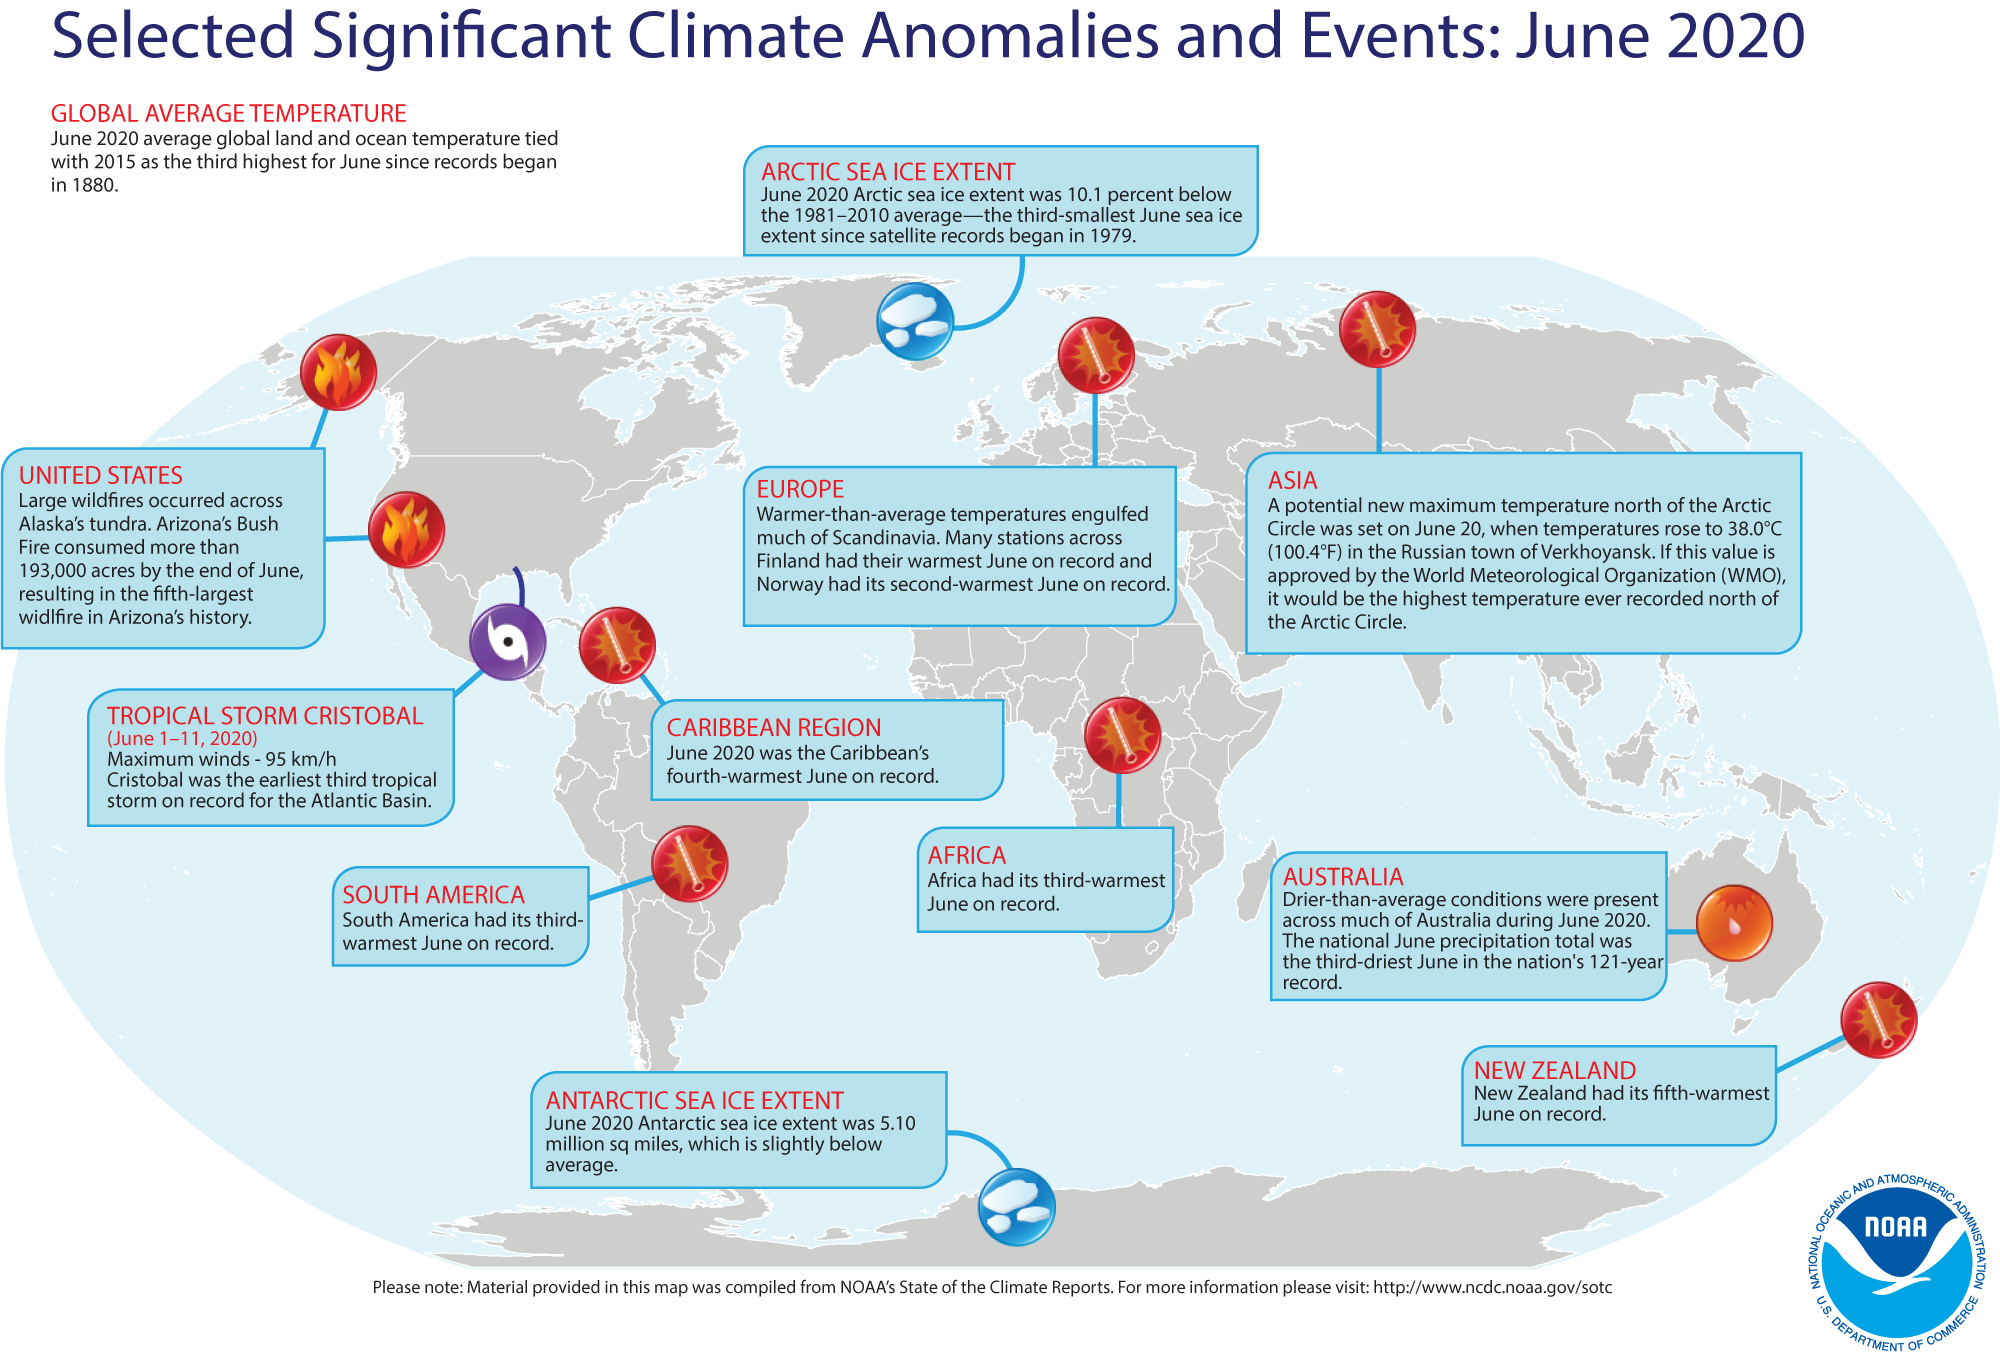 NOAA – June 2020 tied as Earth’s 3rd hottest on record